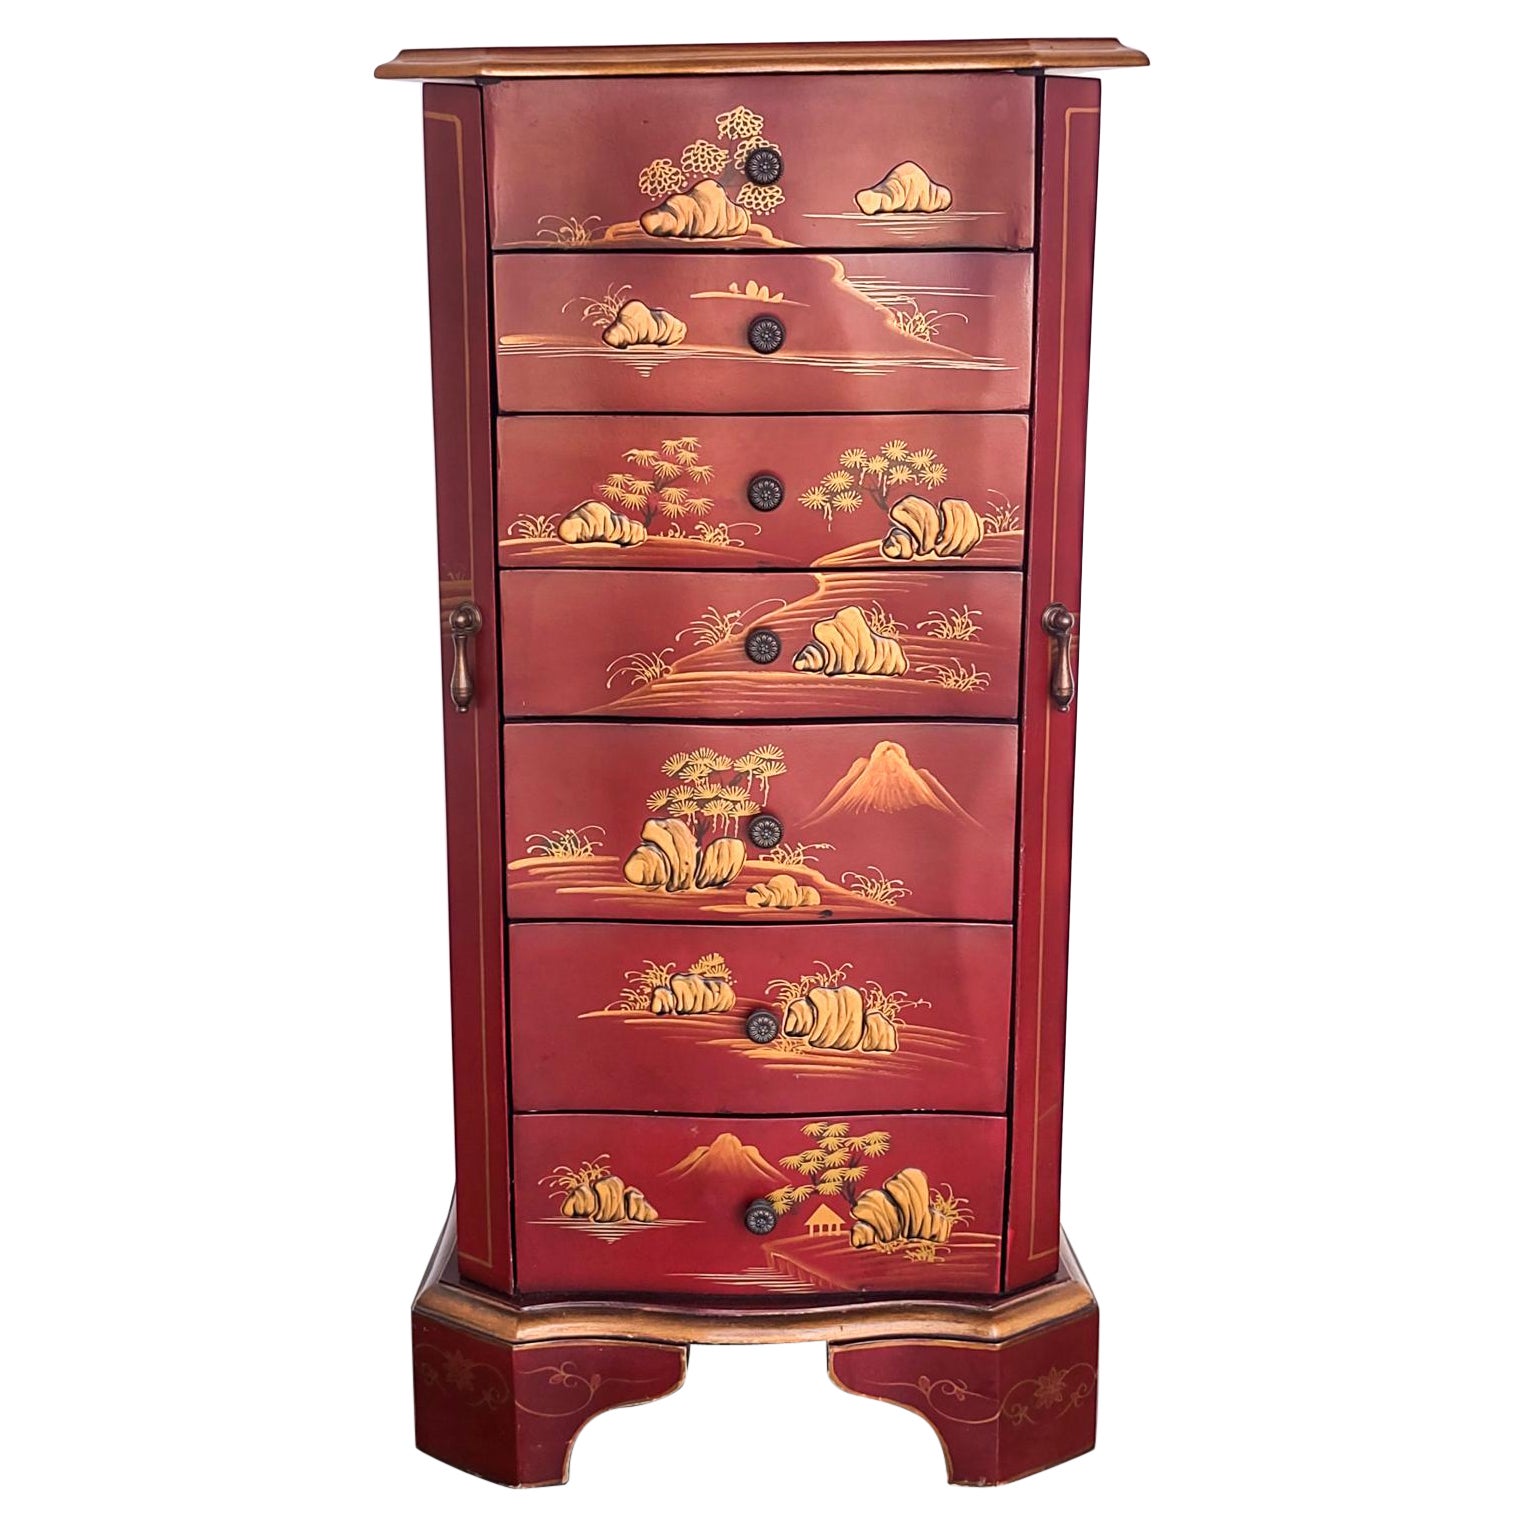 Painted Red Wood Chinese Jewelry Chest of Drawers Storage